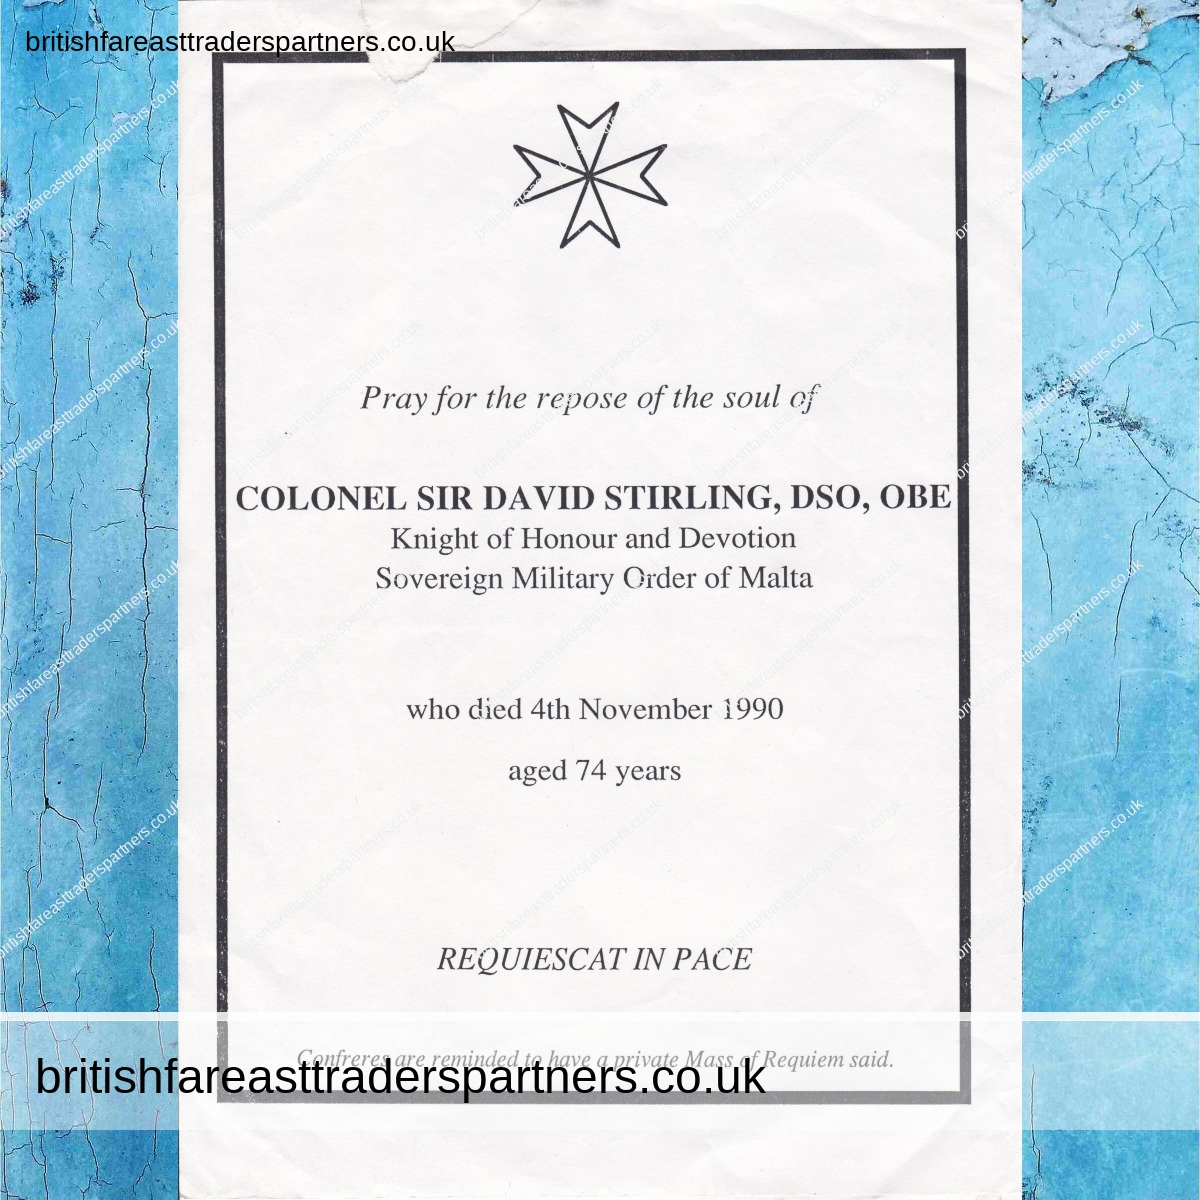 VINTAGE 1990 EPHEMERA COLONEL SIR DAVID STIRLING, DSO, OBE FOUNDER OF THE BRITISH SPECIAL AIR SERVICE (SAS) VINTAGE & ANTIQUES | COLLECTABLES |  MILITARIA | BRITISH | UNITED KNGDOM EPHEMERA | ENGLISH / ENGLAND | UNITED KINGDOM CULTURE | HISTORY | HERITAGE